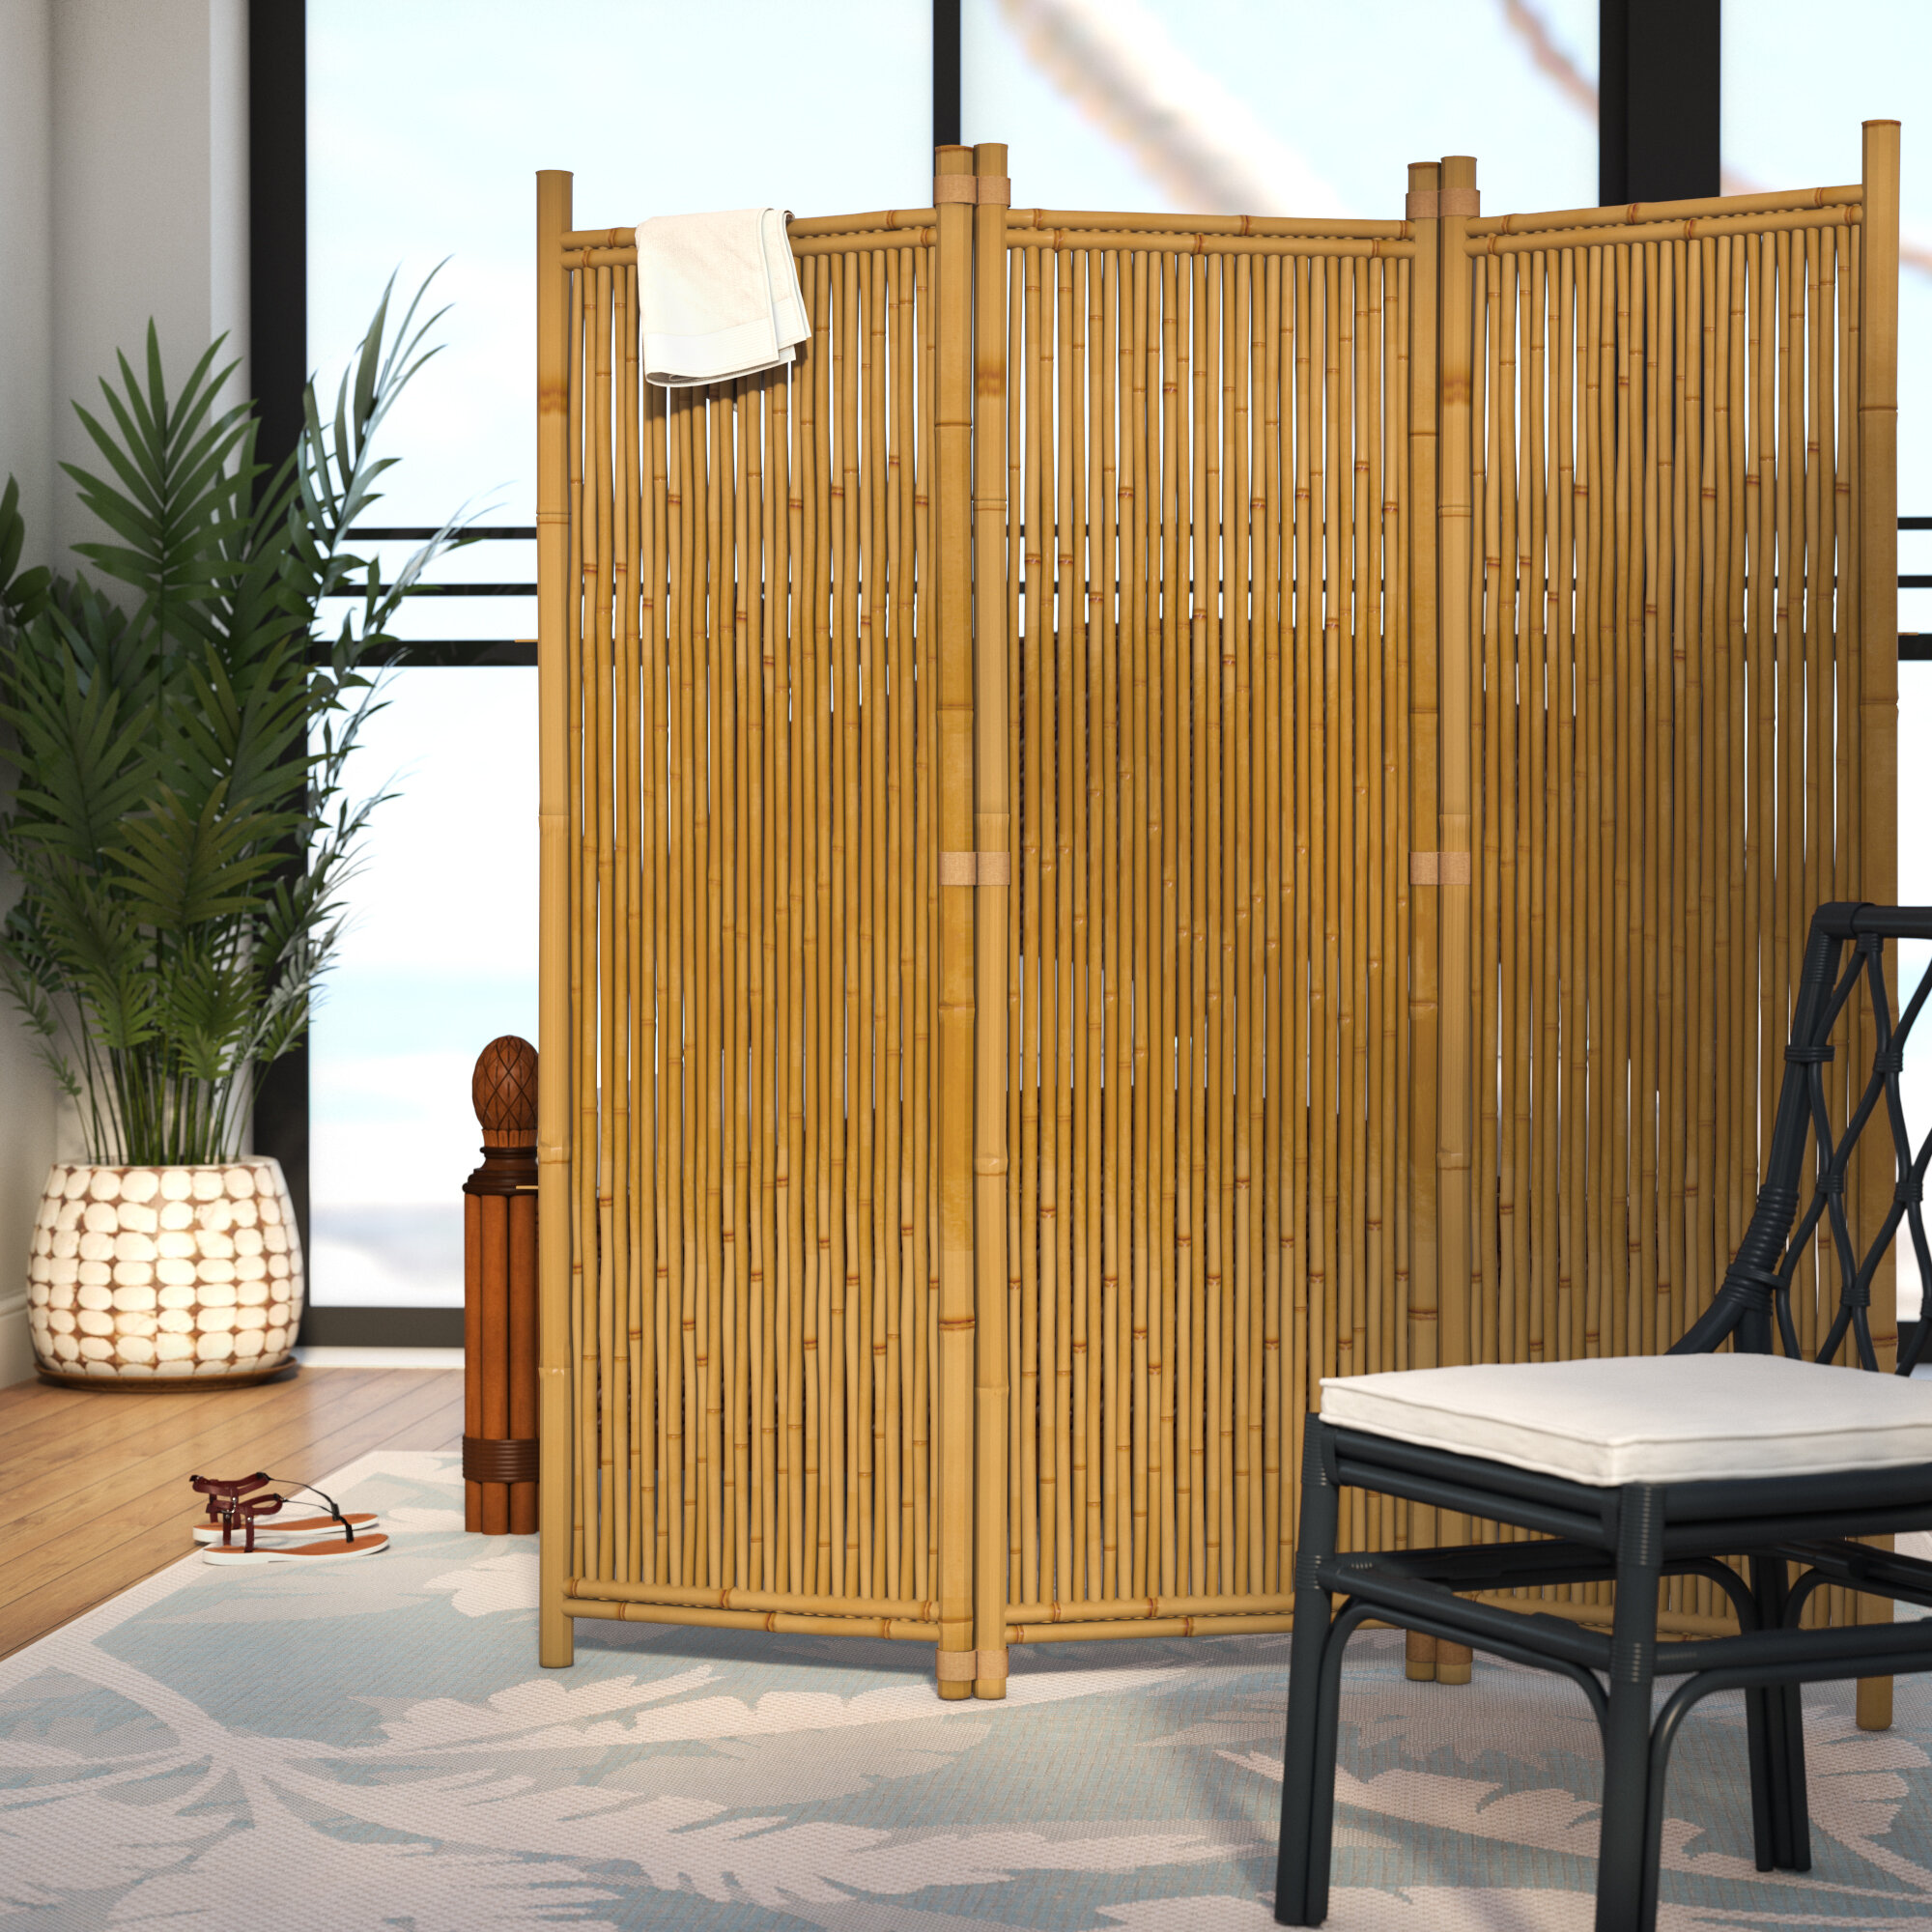 Festnight 4 Panel Bamboo Room Divider Privacy Screen Home Office 